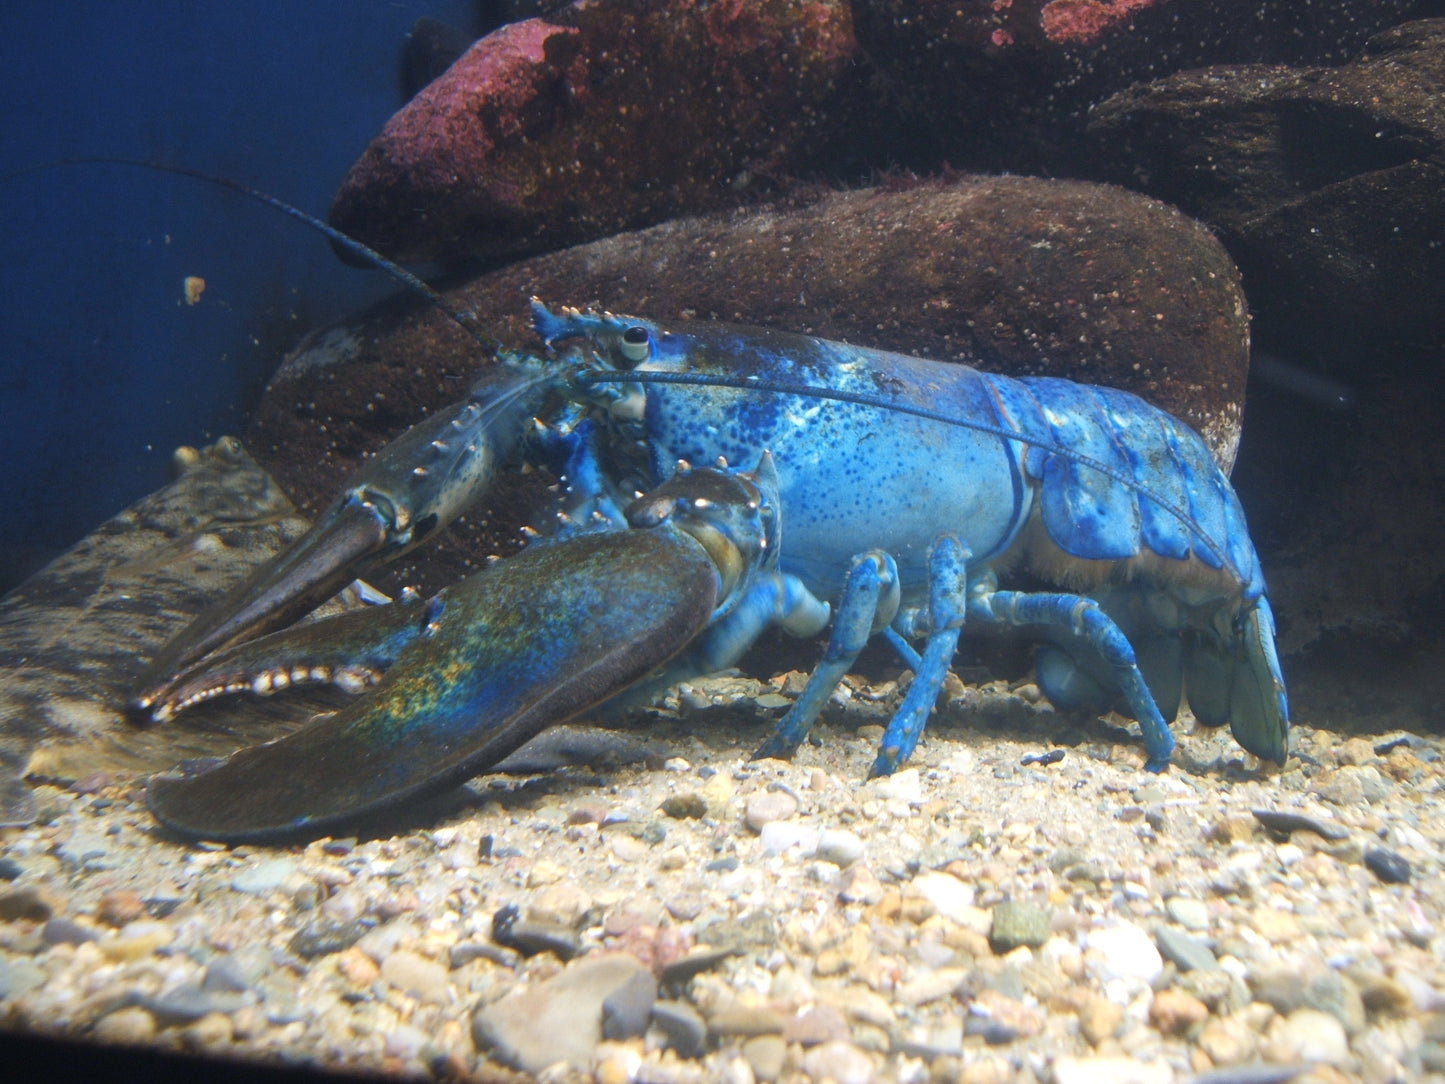 BLUE LOBSTER GLOSSY POSTER PICTURE PHOTO PRINT BANNER fish ocean cool pic